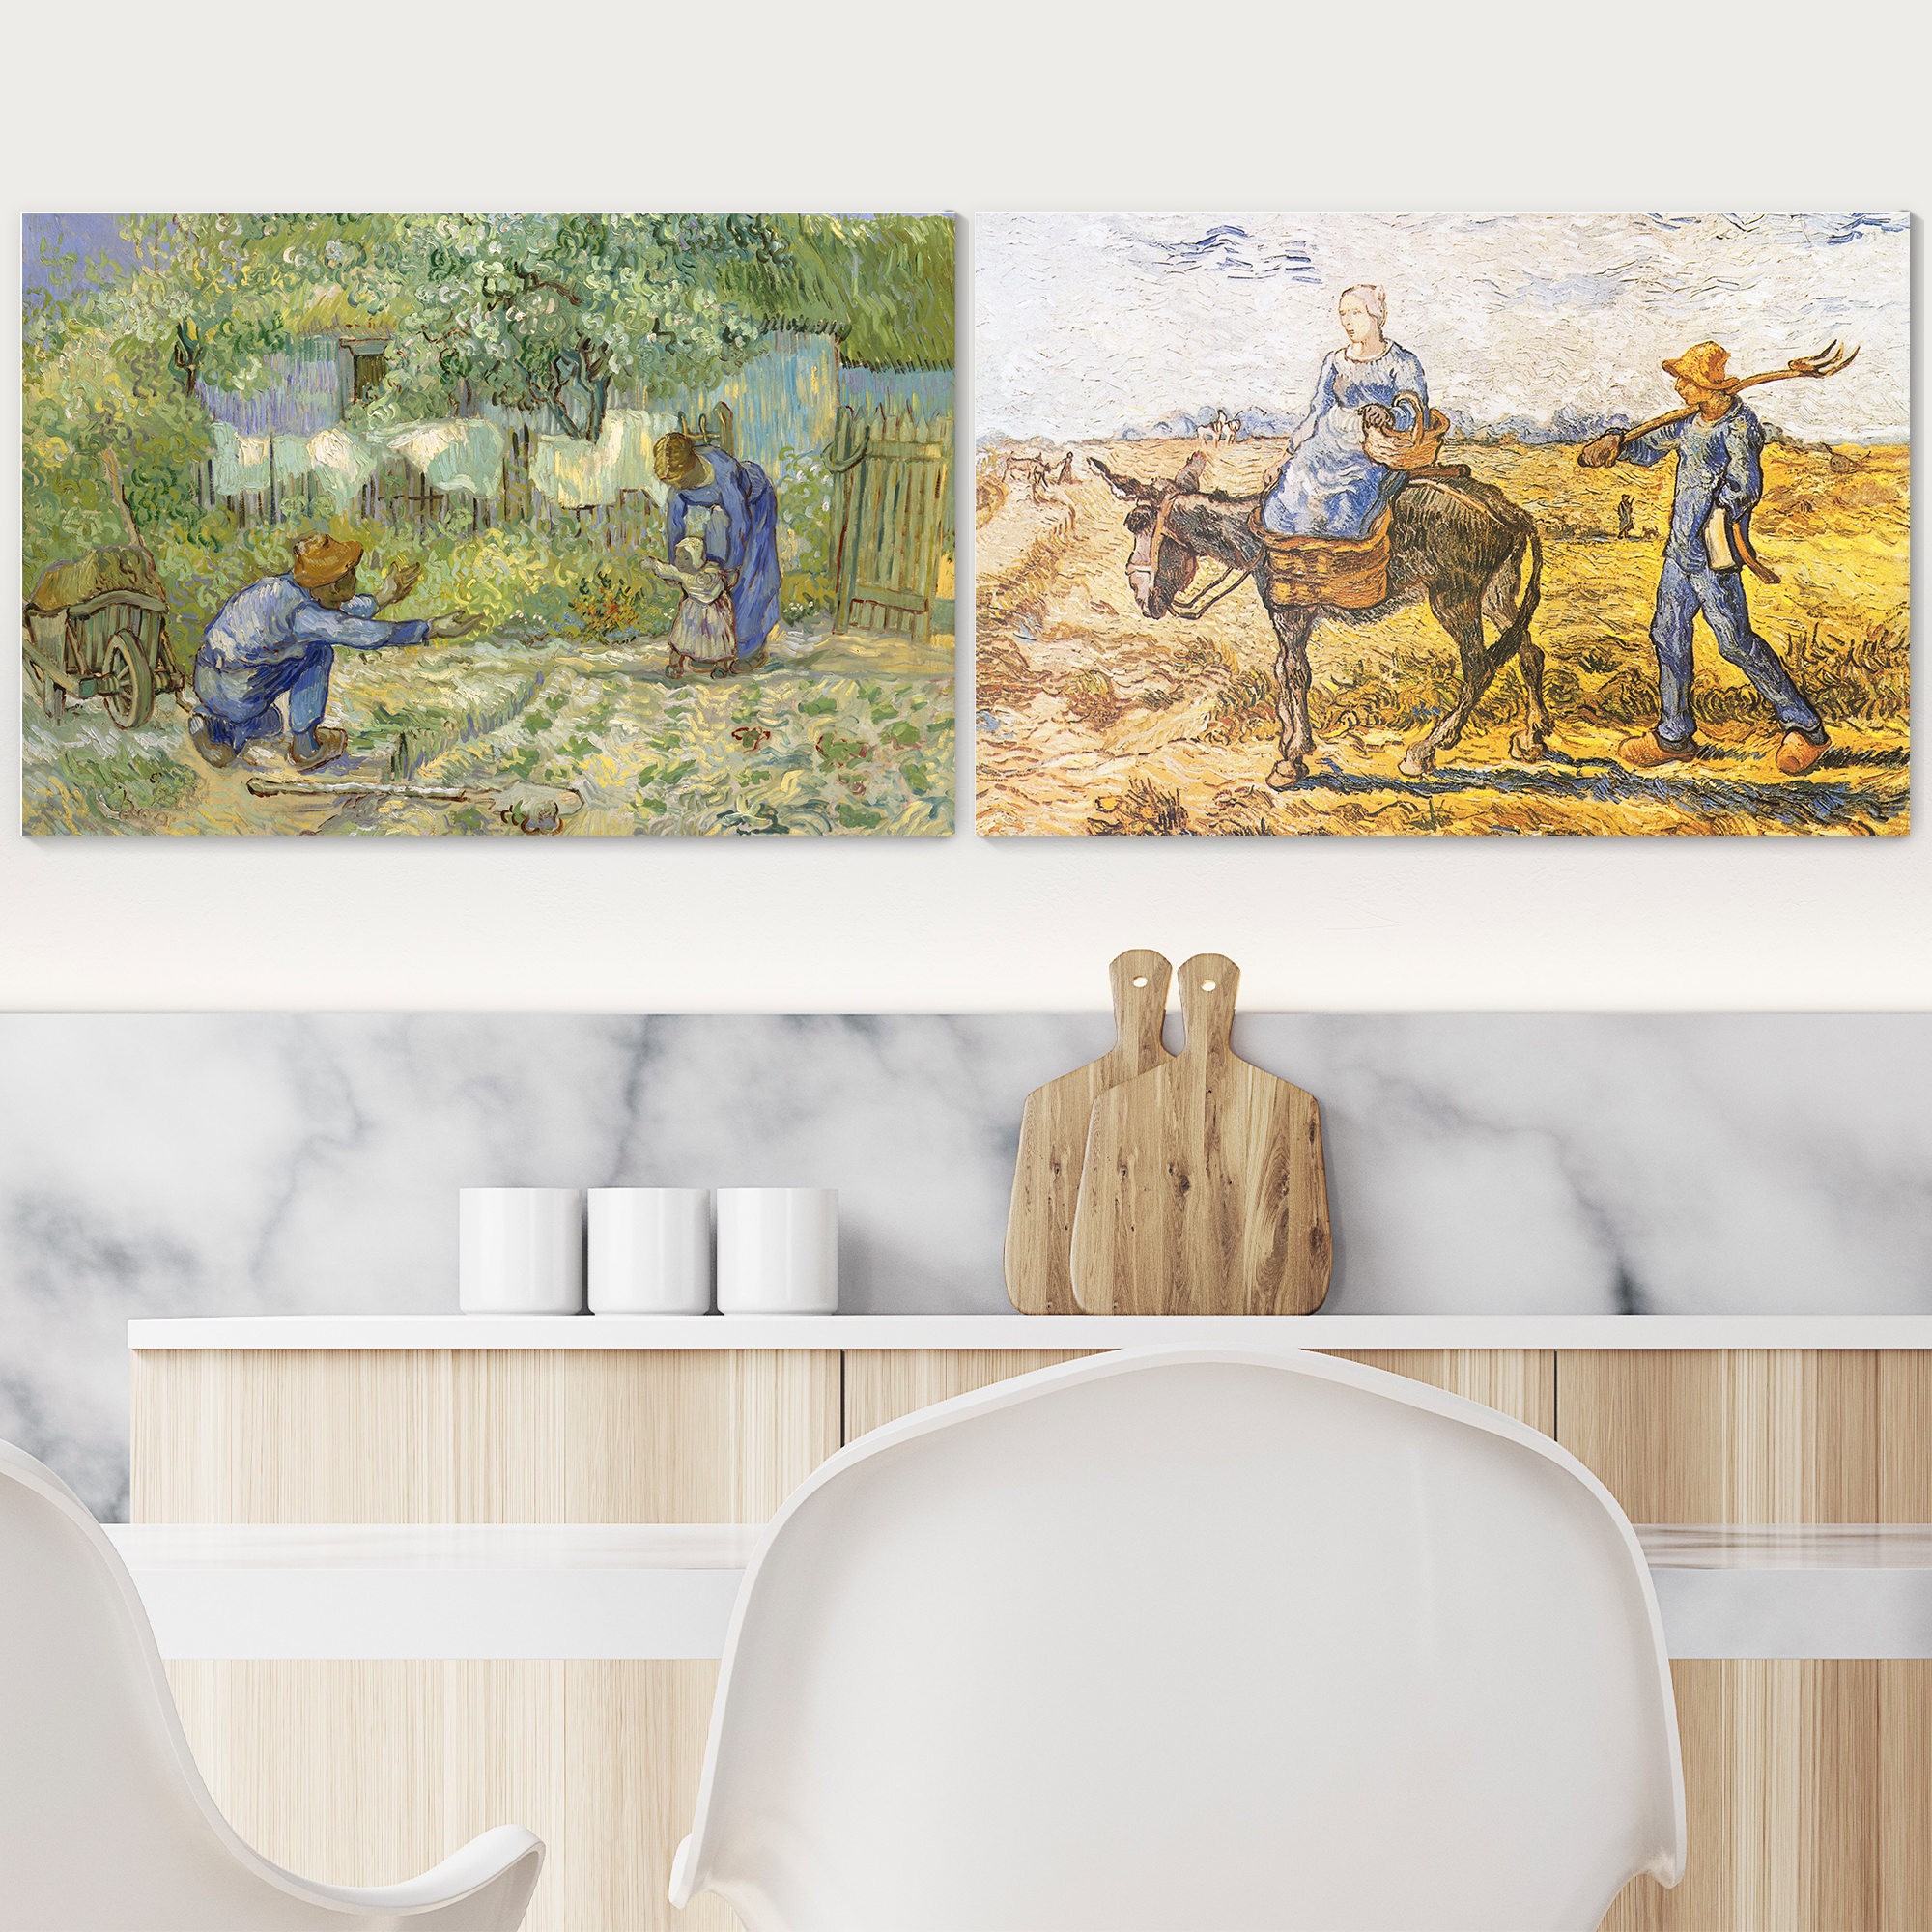 Morning: Peasant Couple Going to Work/First Steps (After Millet) by Vincent Van Gogh - Oil Painting Reproduction in Set of 2 | Canvas Prints Wall Art, Ready to Hang - 16